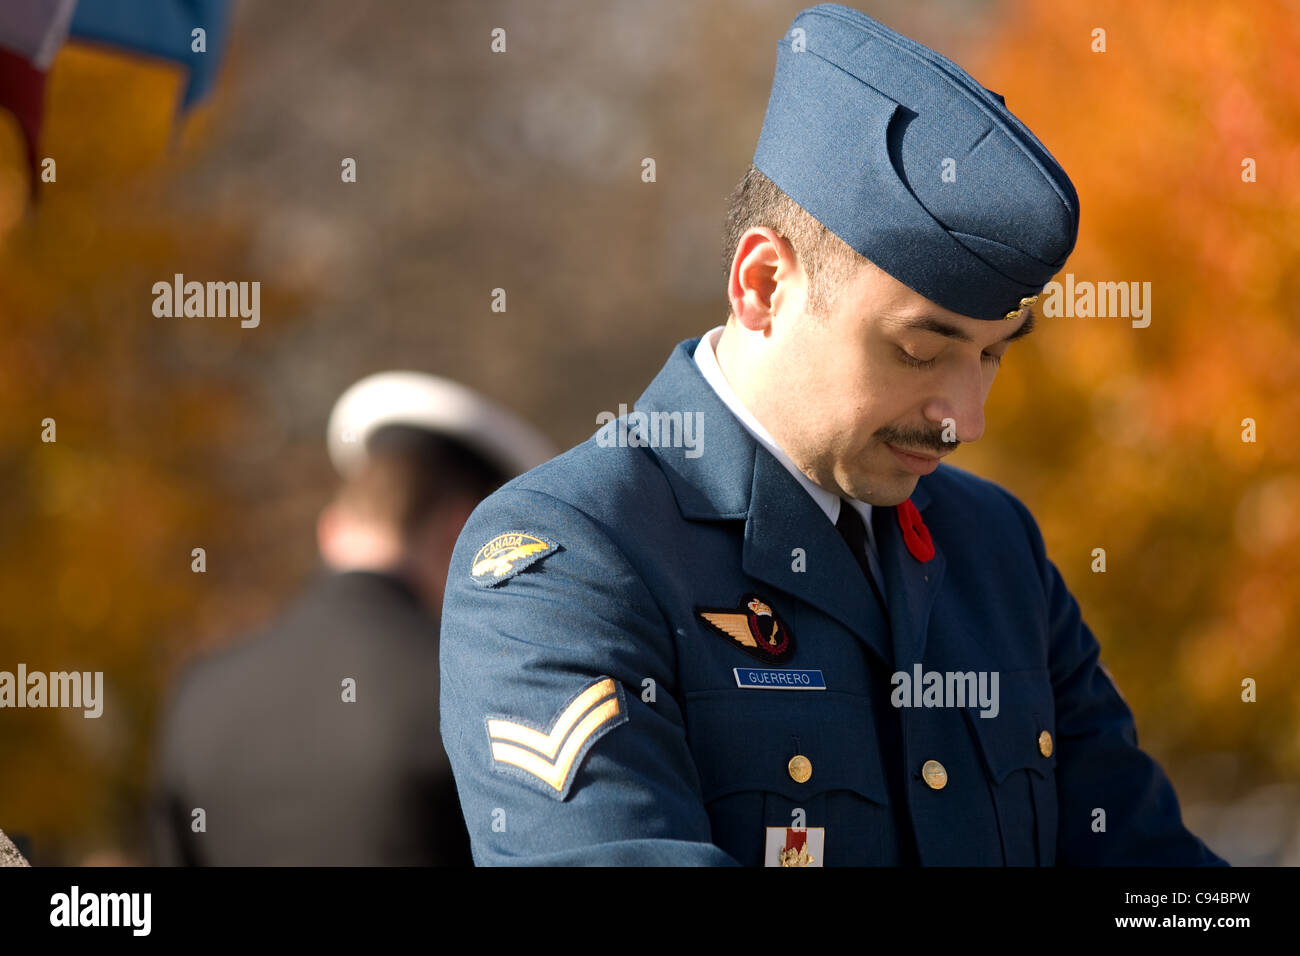 London Ontario, Canada - November 11, 2011. A Canadian airman and sailor stand posts during Remembrance Day ceremonies at the Cenotaph in Victoria Park in London Ontario Canada. Stock Photo